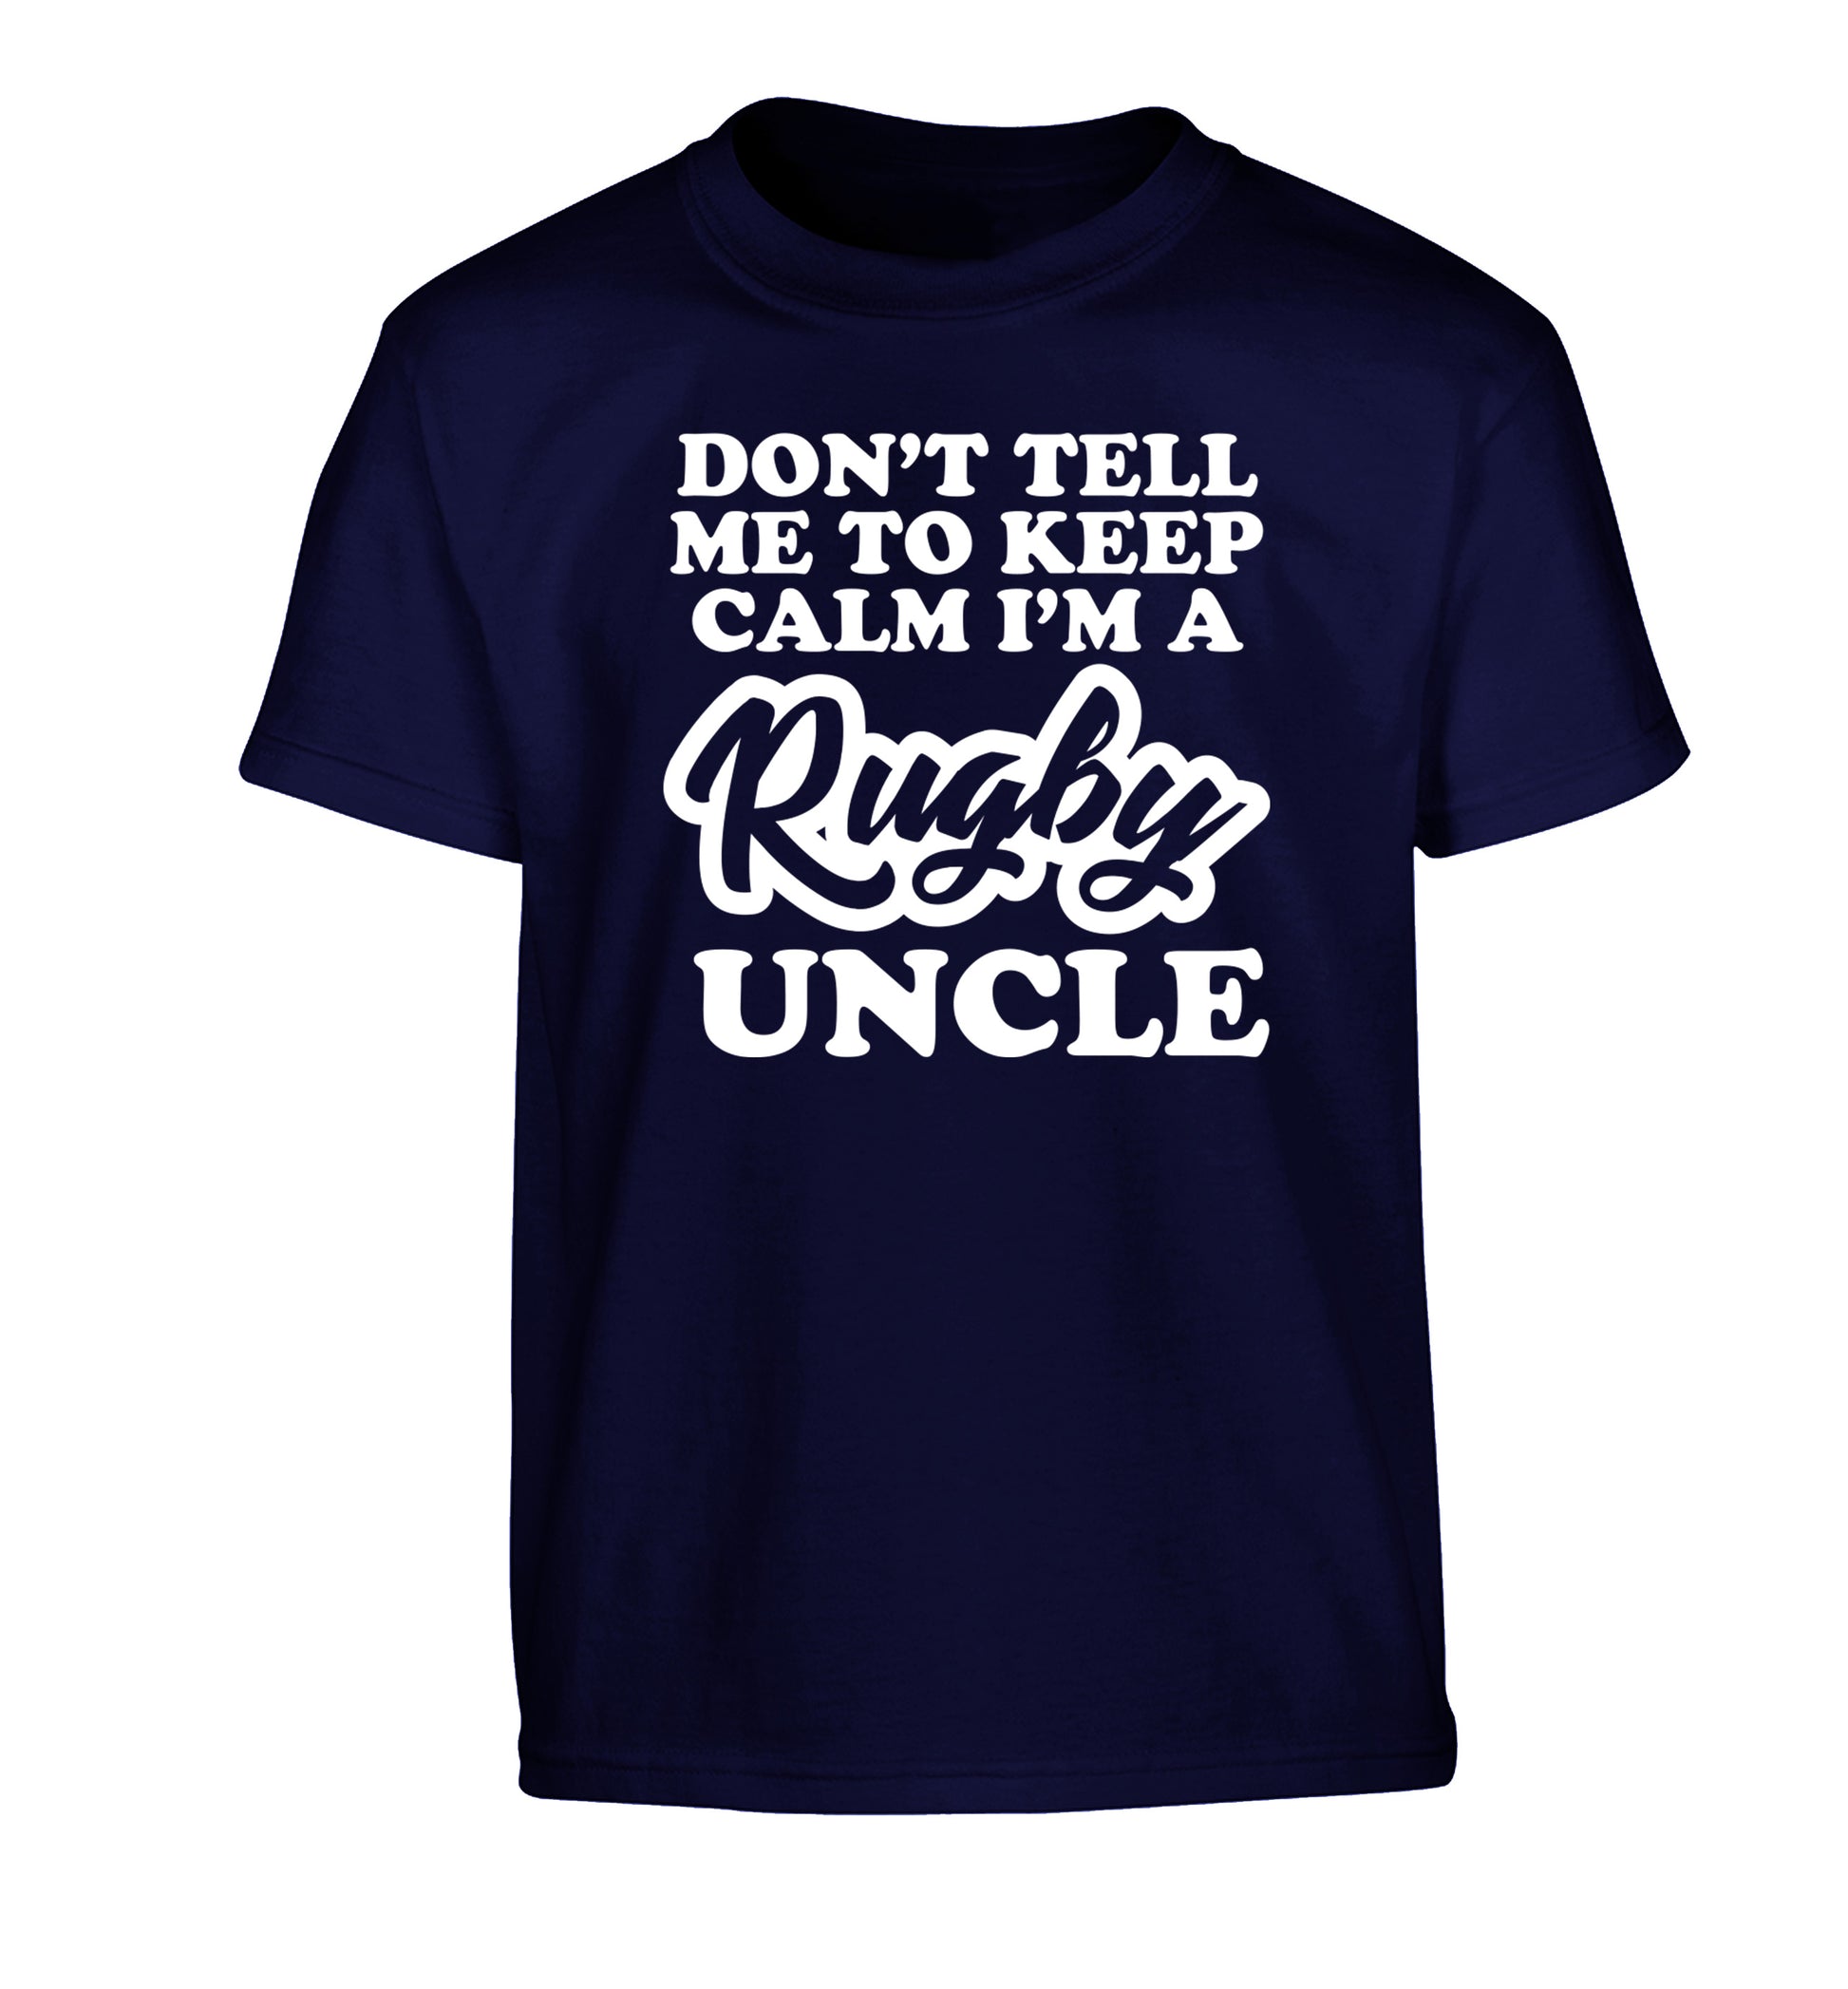 Don't tell me to keep calm I'm a rugby uncle Children's navy Tshirt 12-13 Years